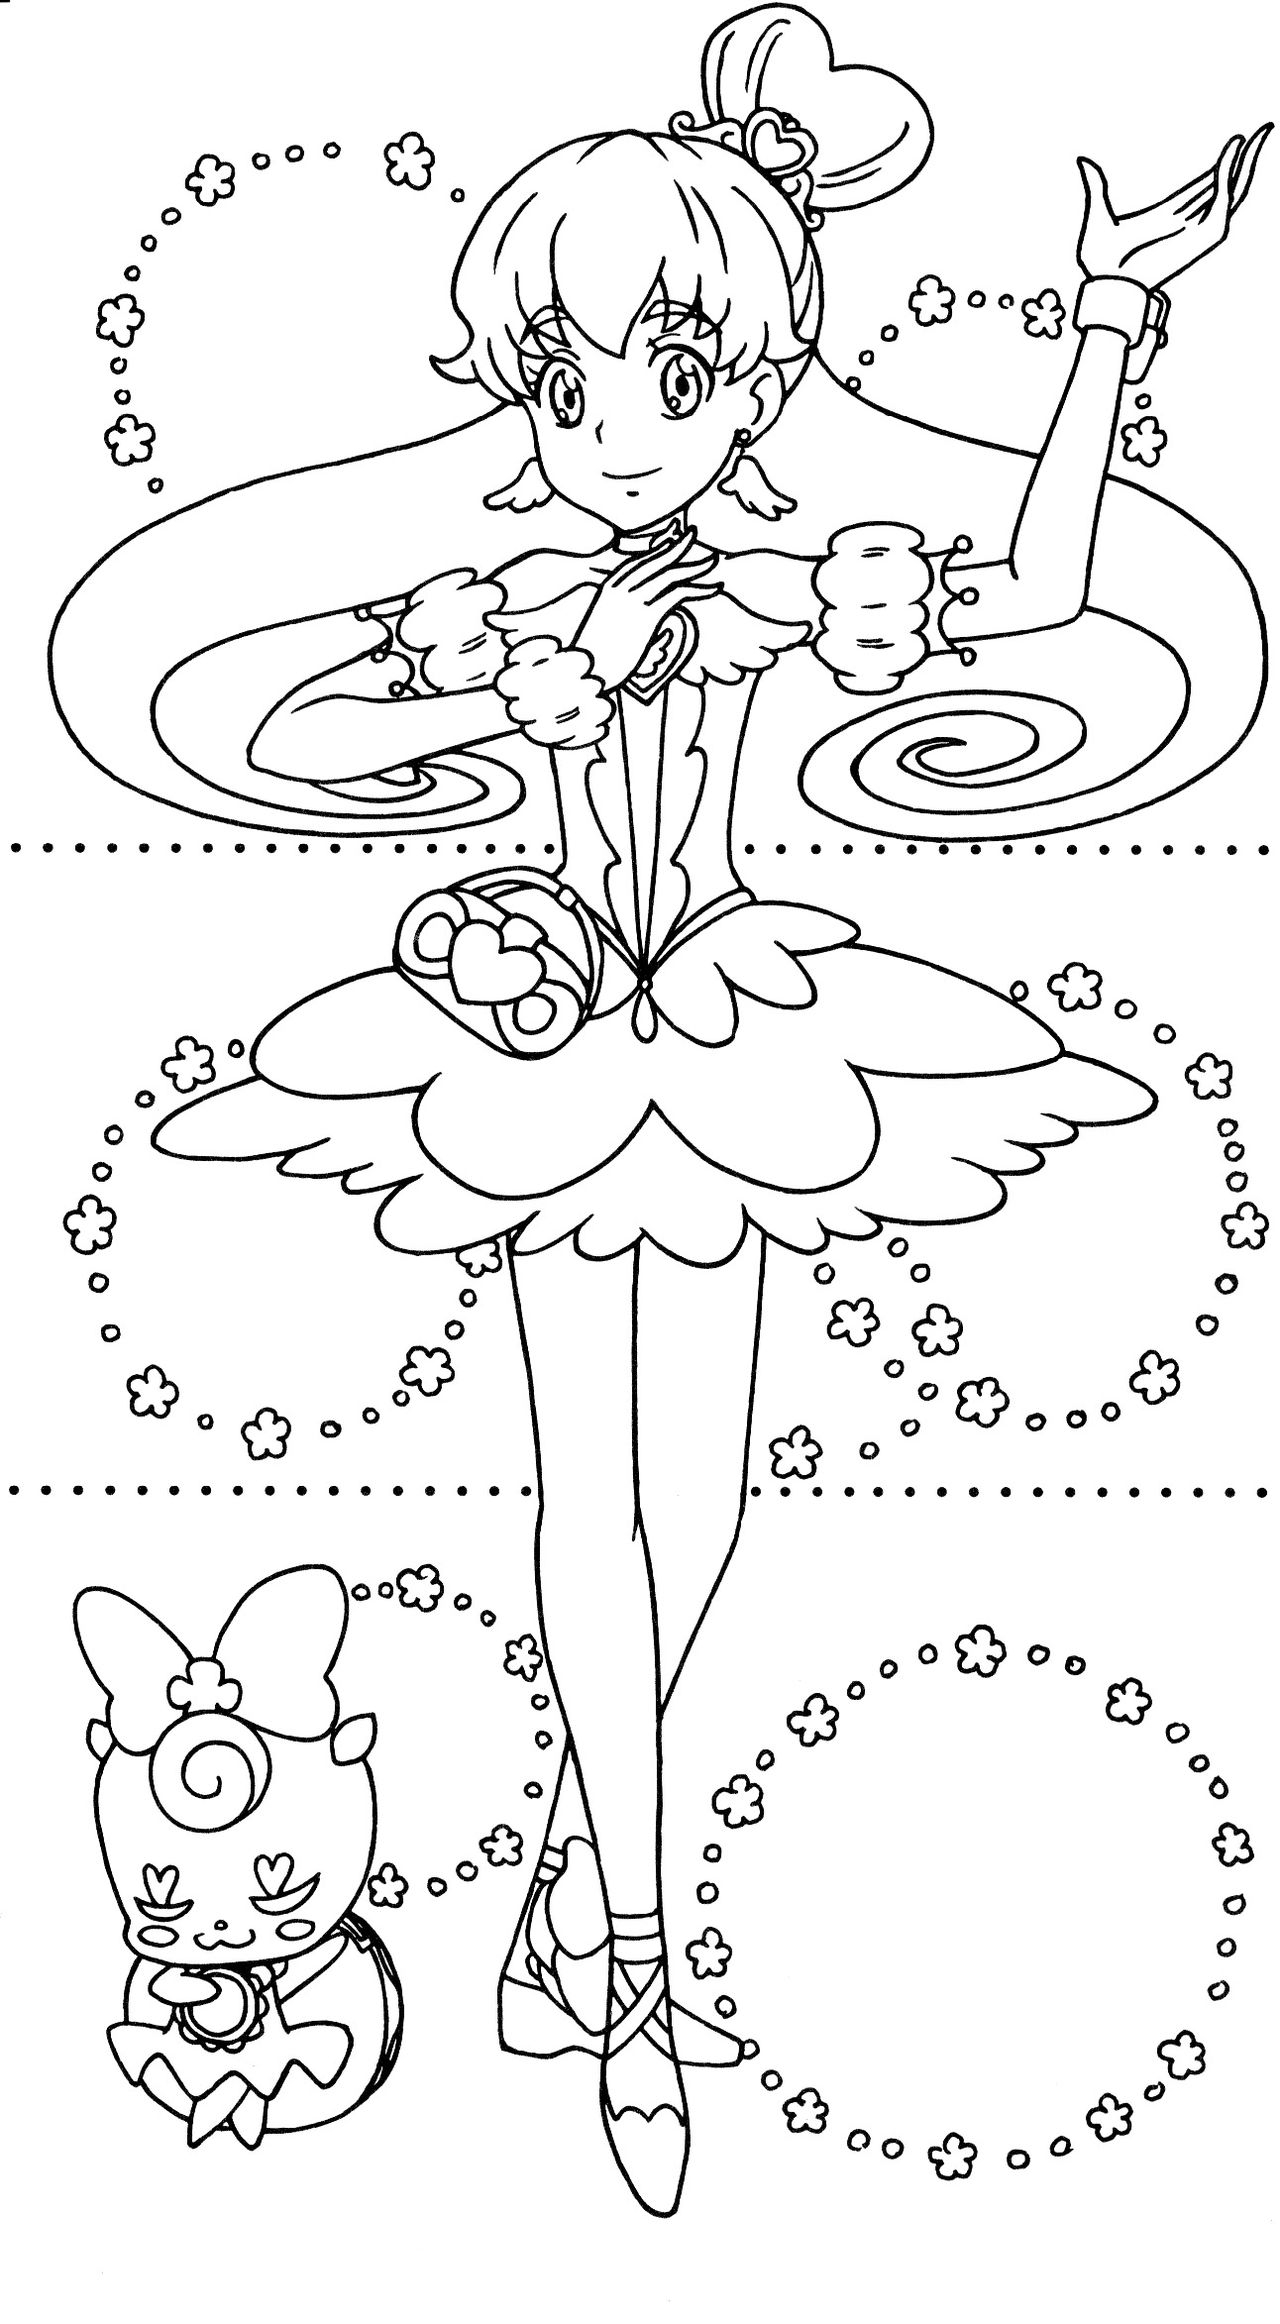 Happiness Charge Precure Dressup Coloring Book 24